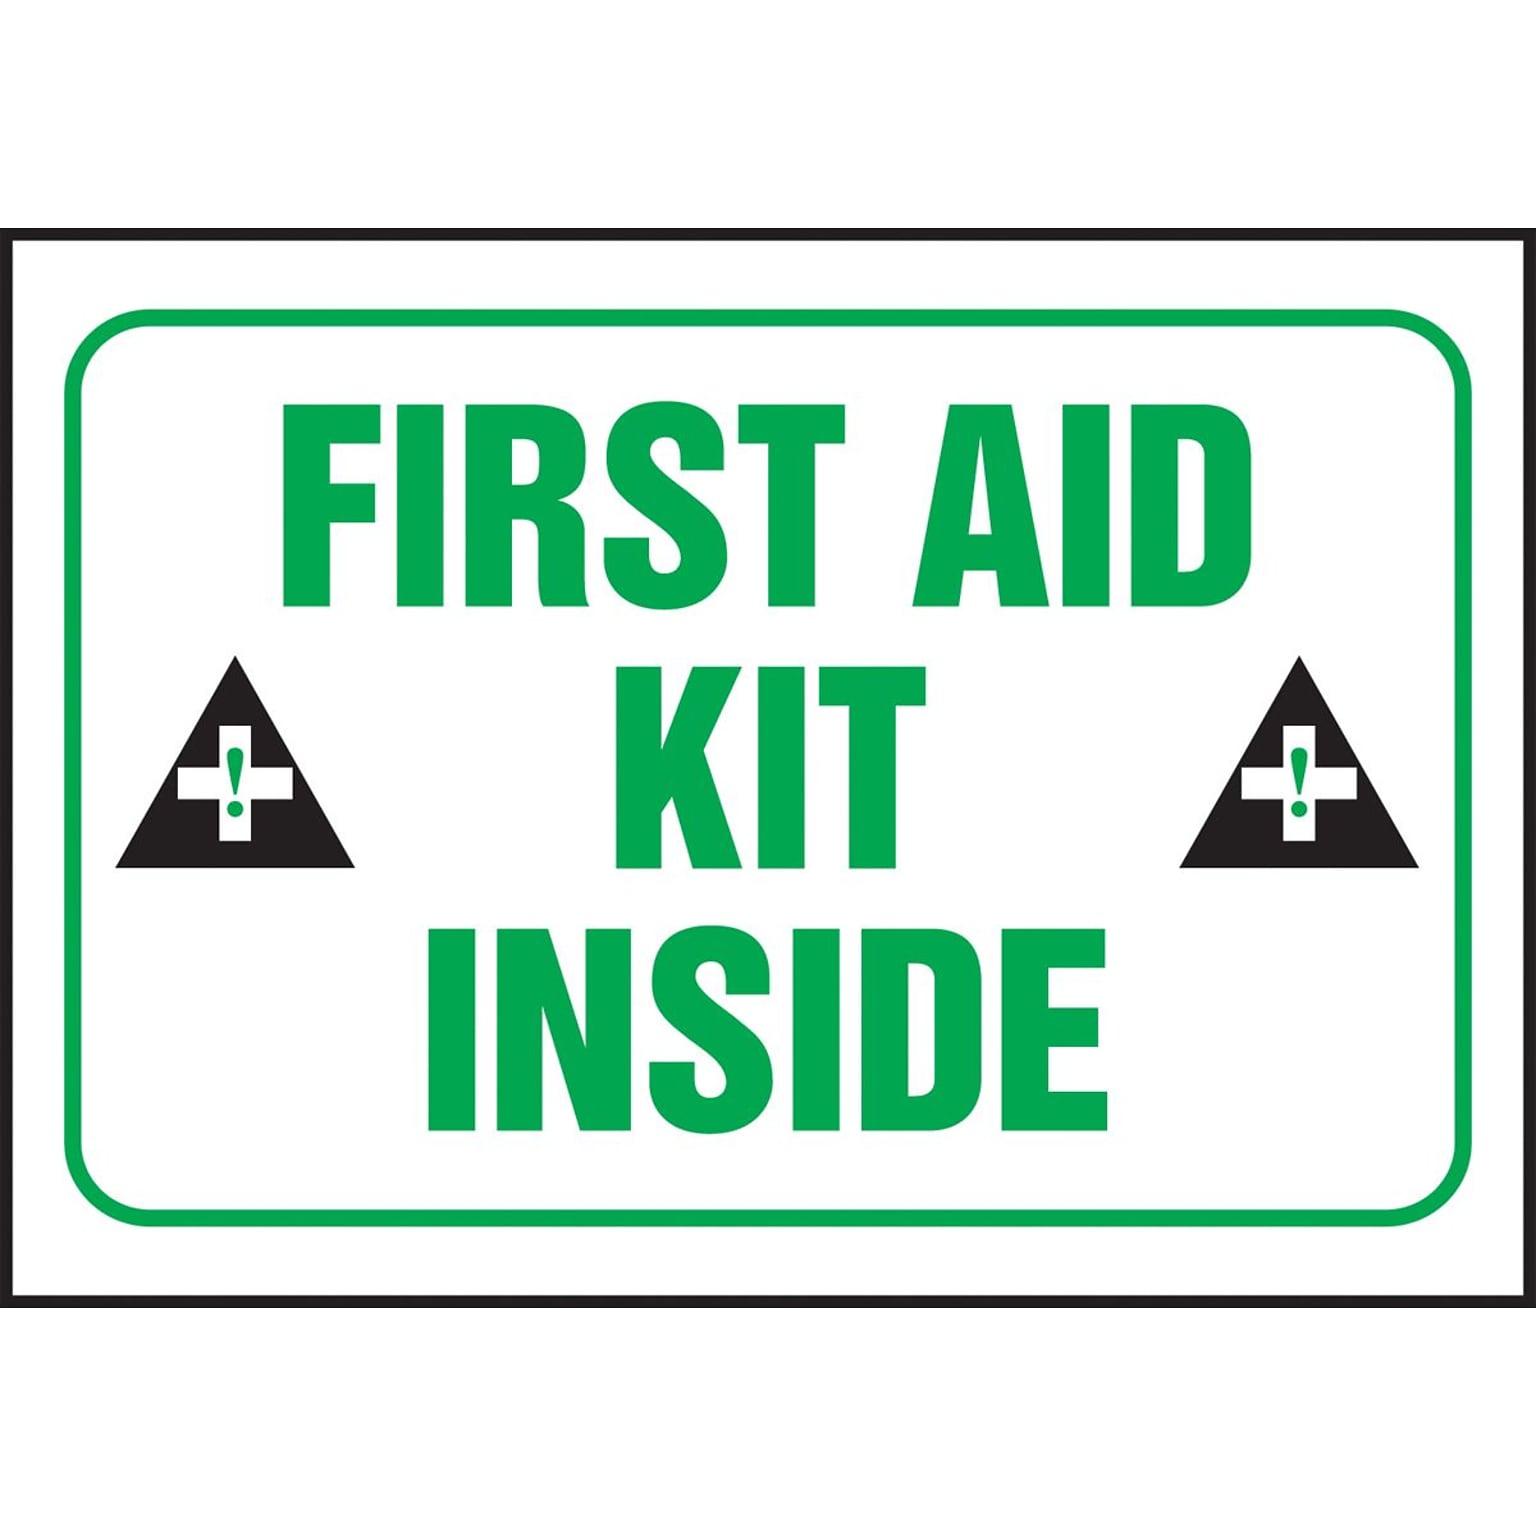 Accuform 3 1/2 x 5 Adhesive Vinyl Safety Label FIRST AID.., Green/Black On White, 5/Pack (LFSD509VSP)